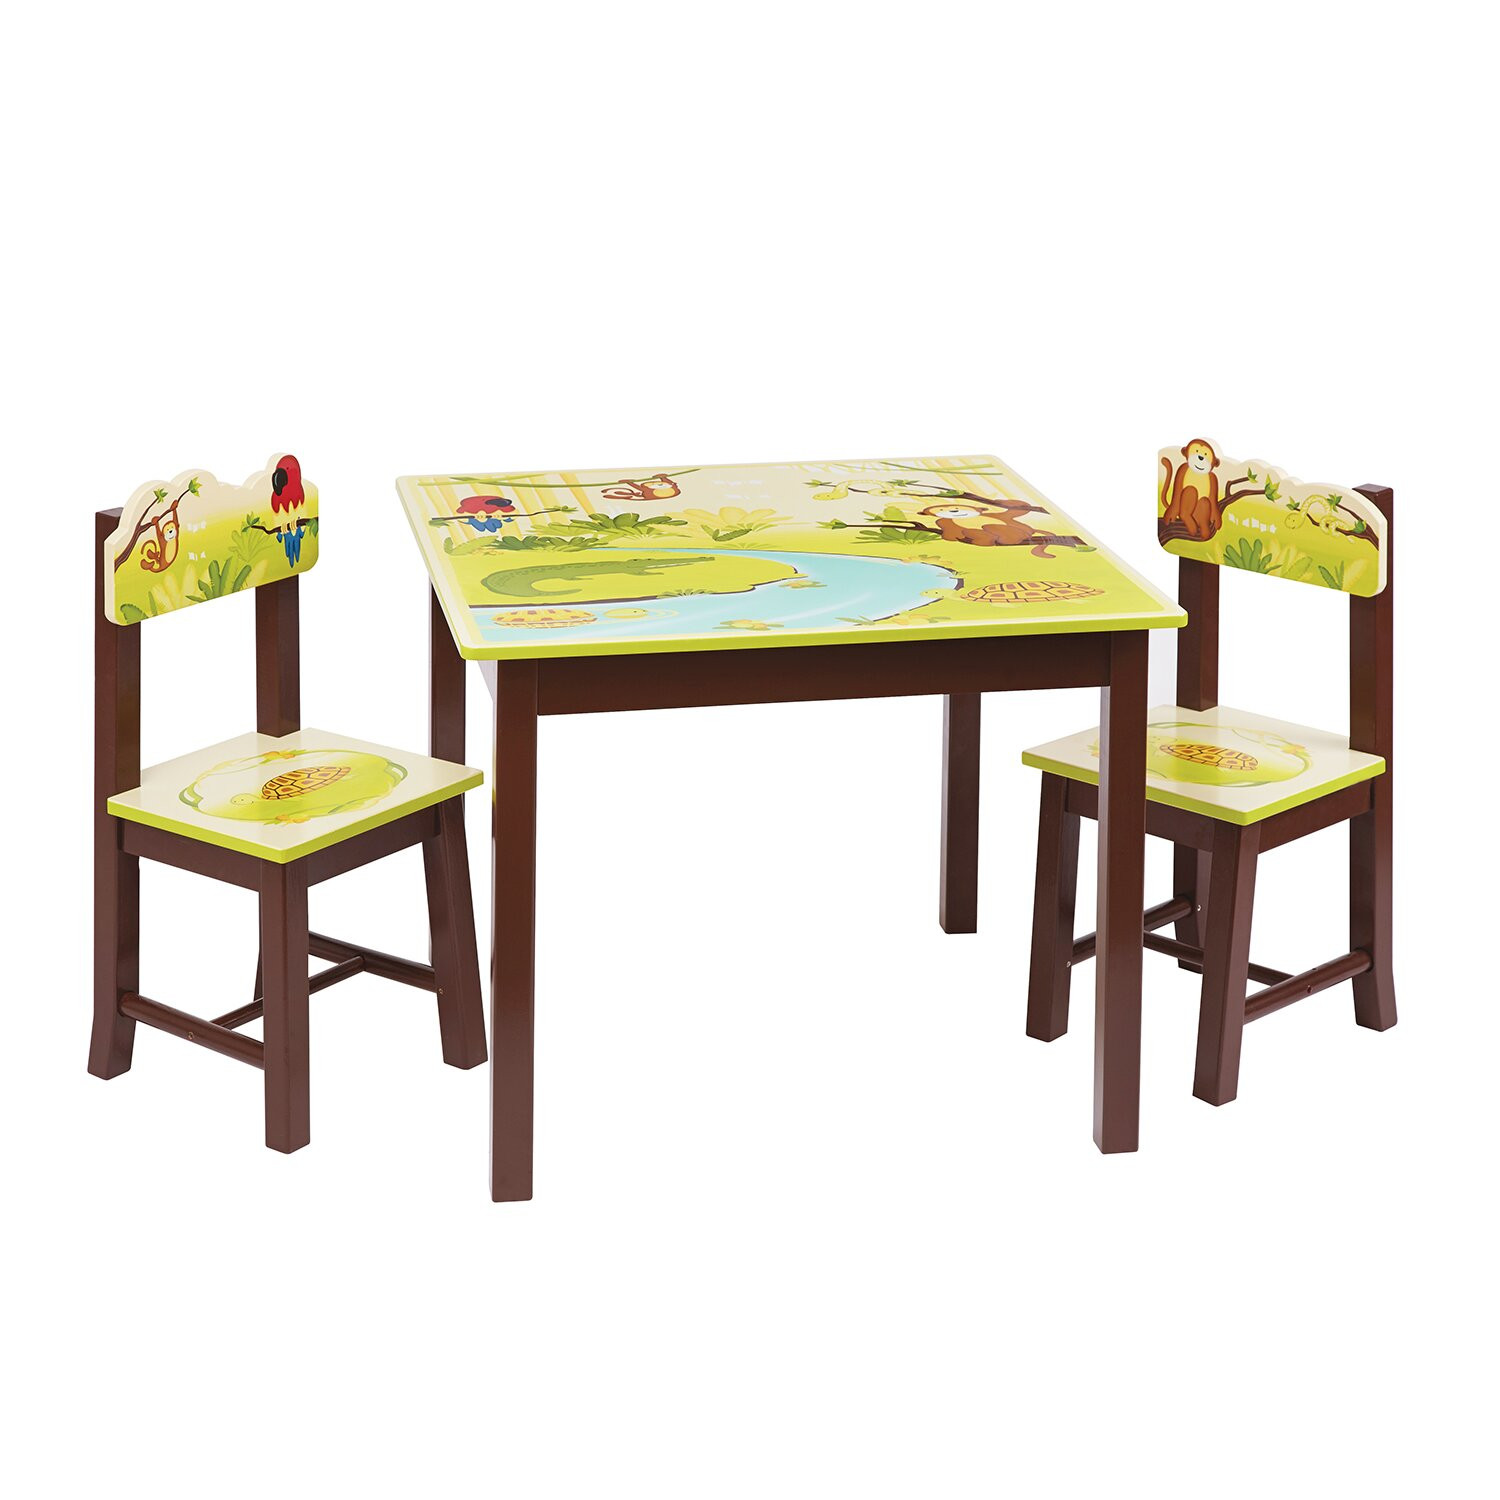 Kids Table And Chair Set
 Guidecraft Jungle Party Kids 3 Piece Rectangle Table and